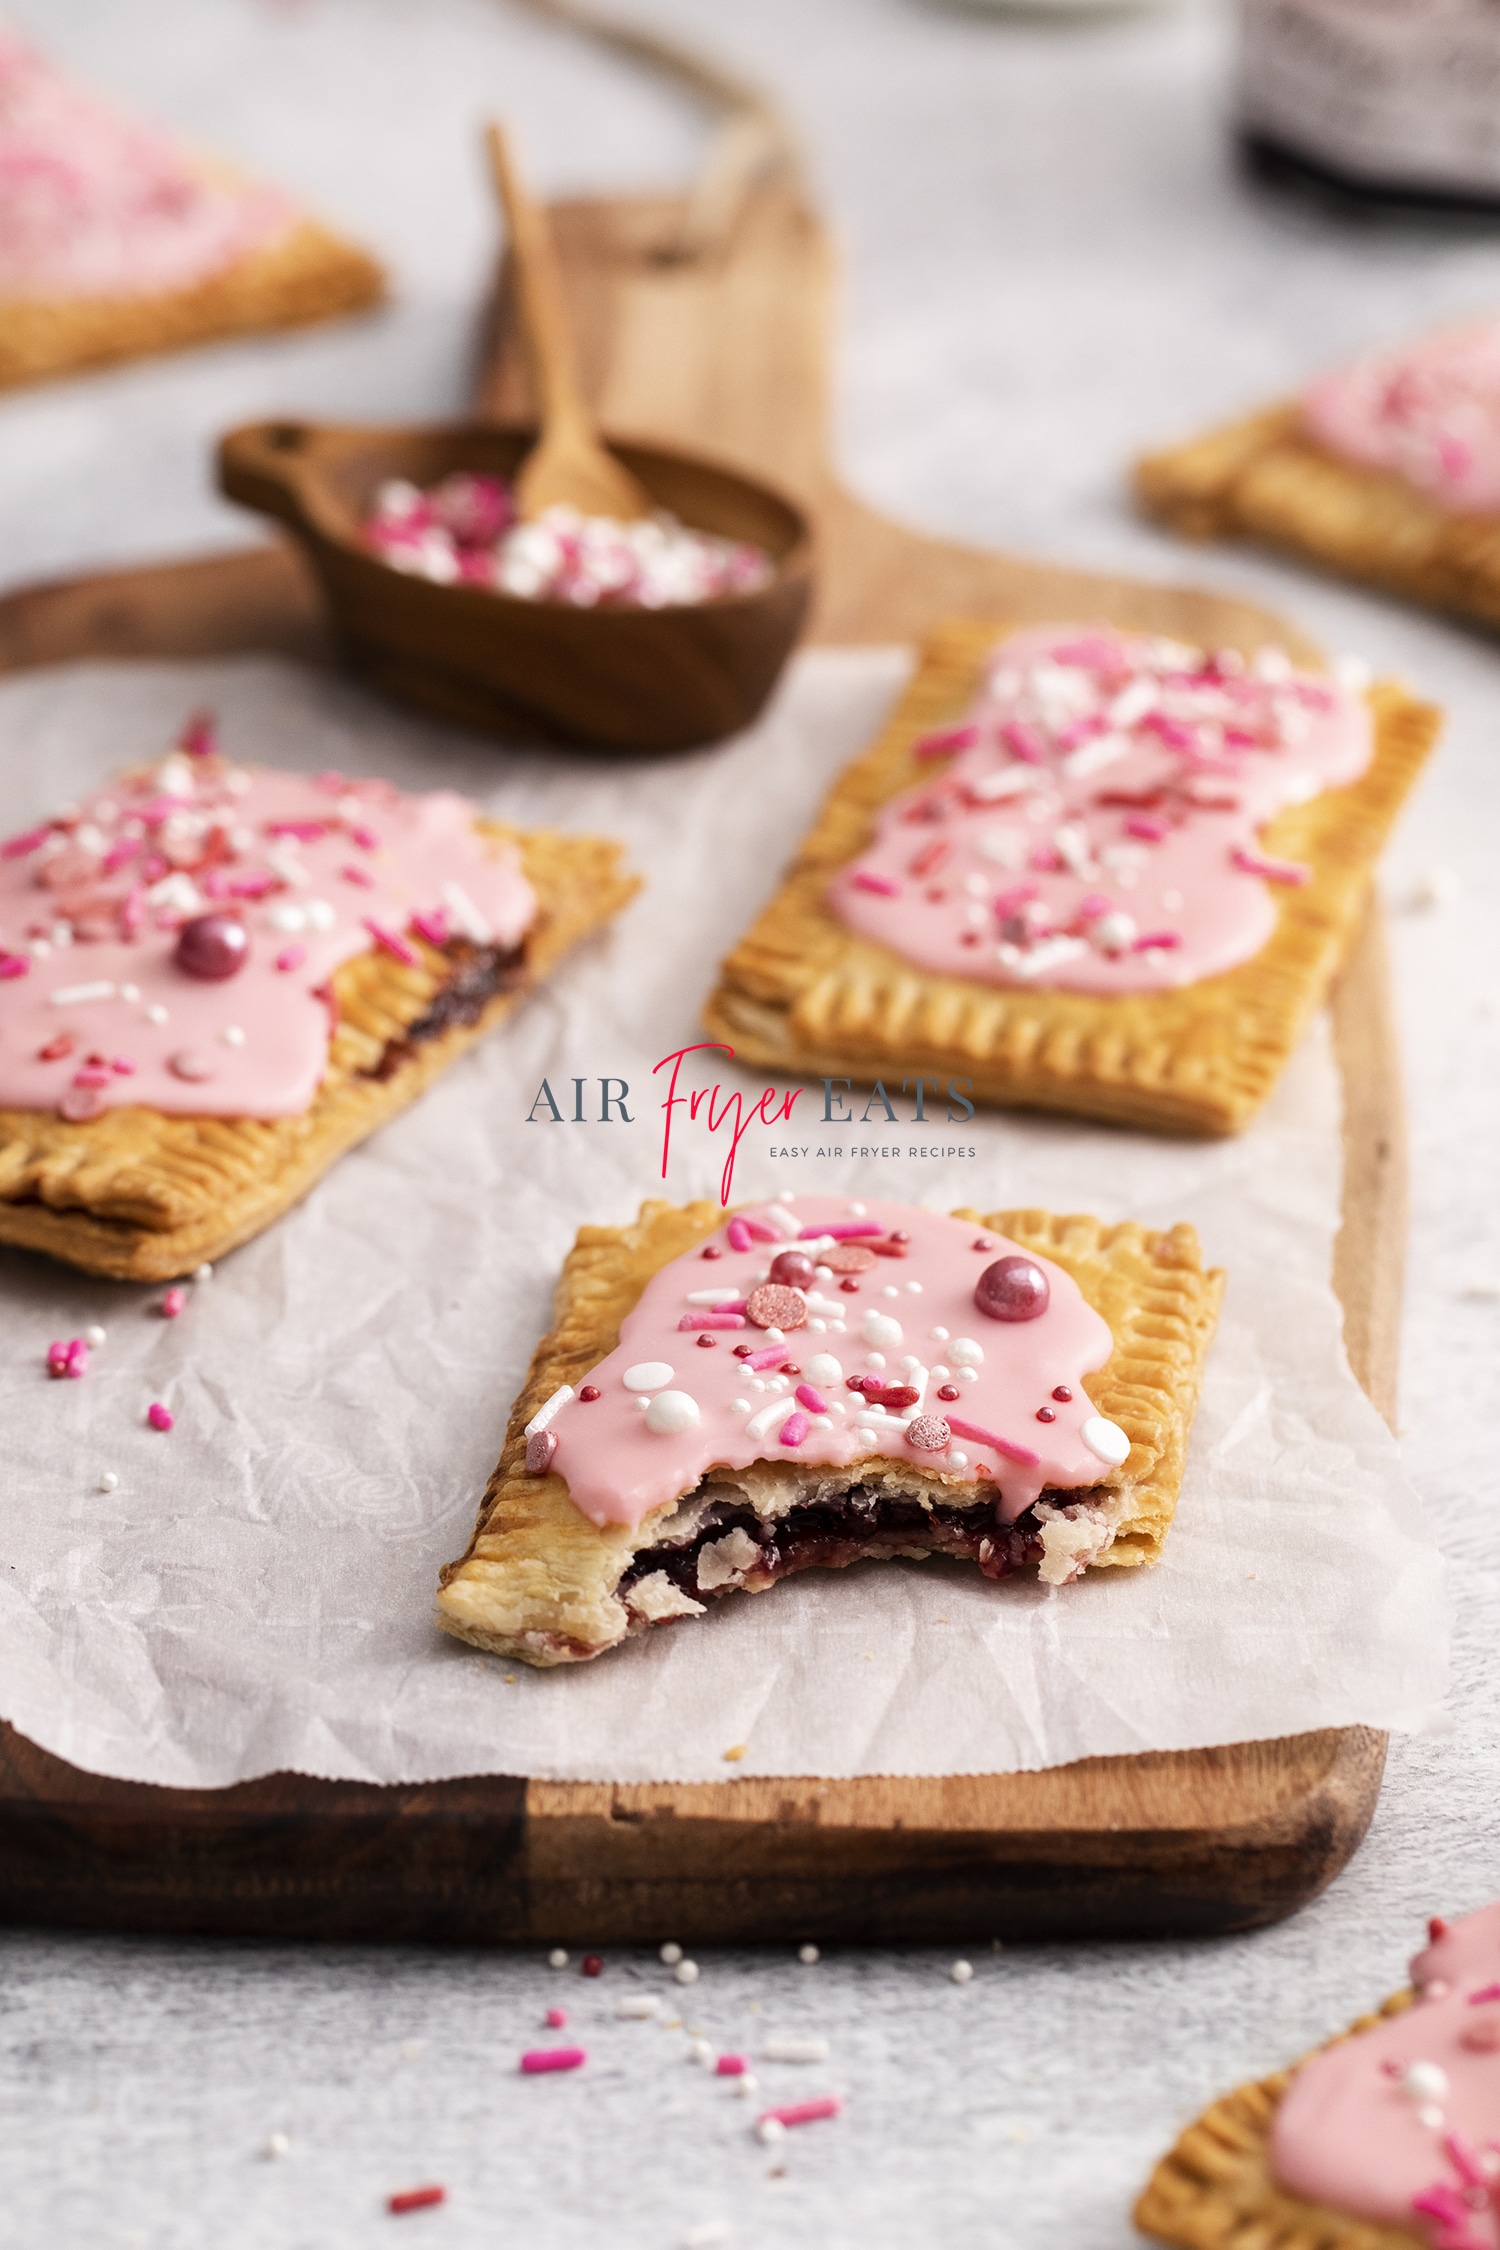 homemade air fried pop tarts with cherry jam filling and pink frosting